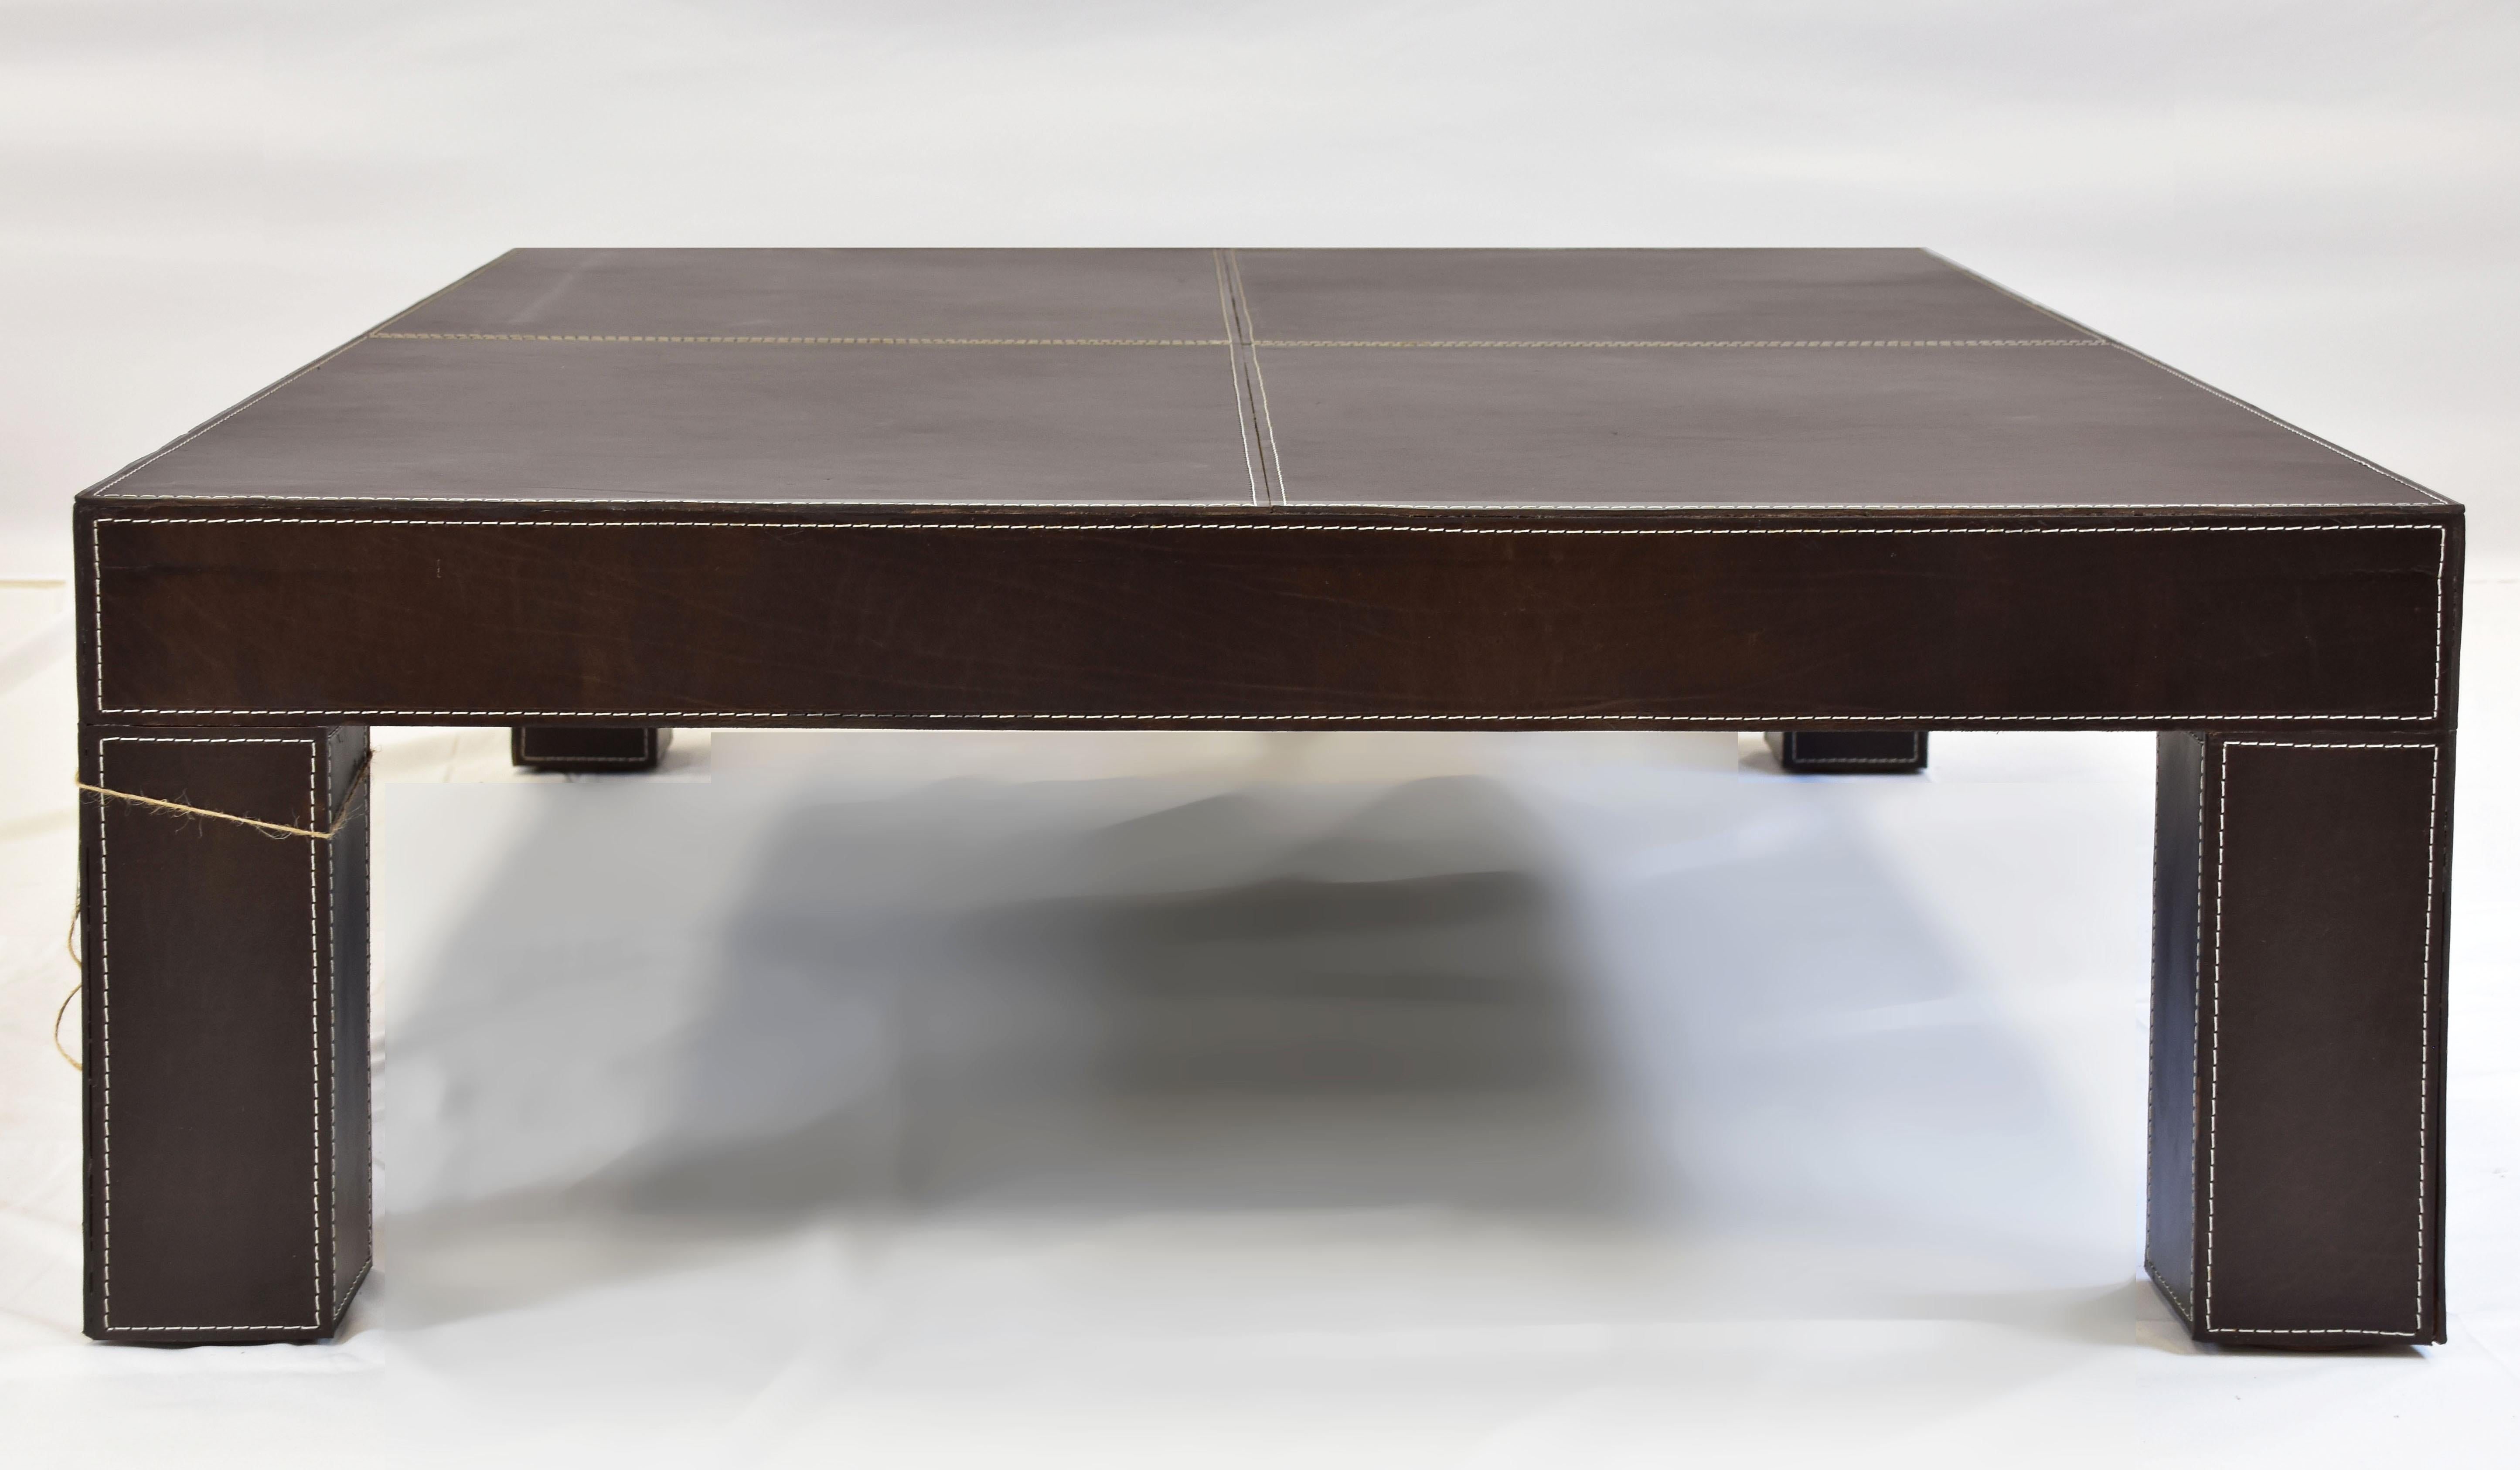 Le Jeune Upholstery Saddle Up Leather Coffee Table Showroom Model In Good Condition For Sale In Miami, FL